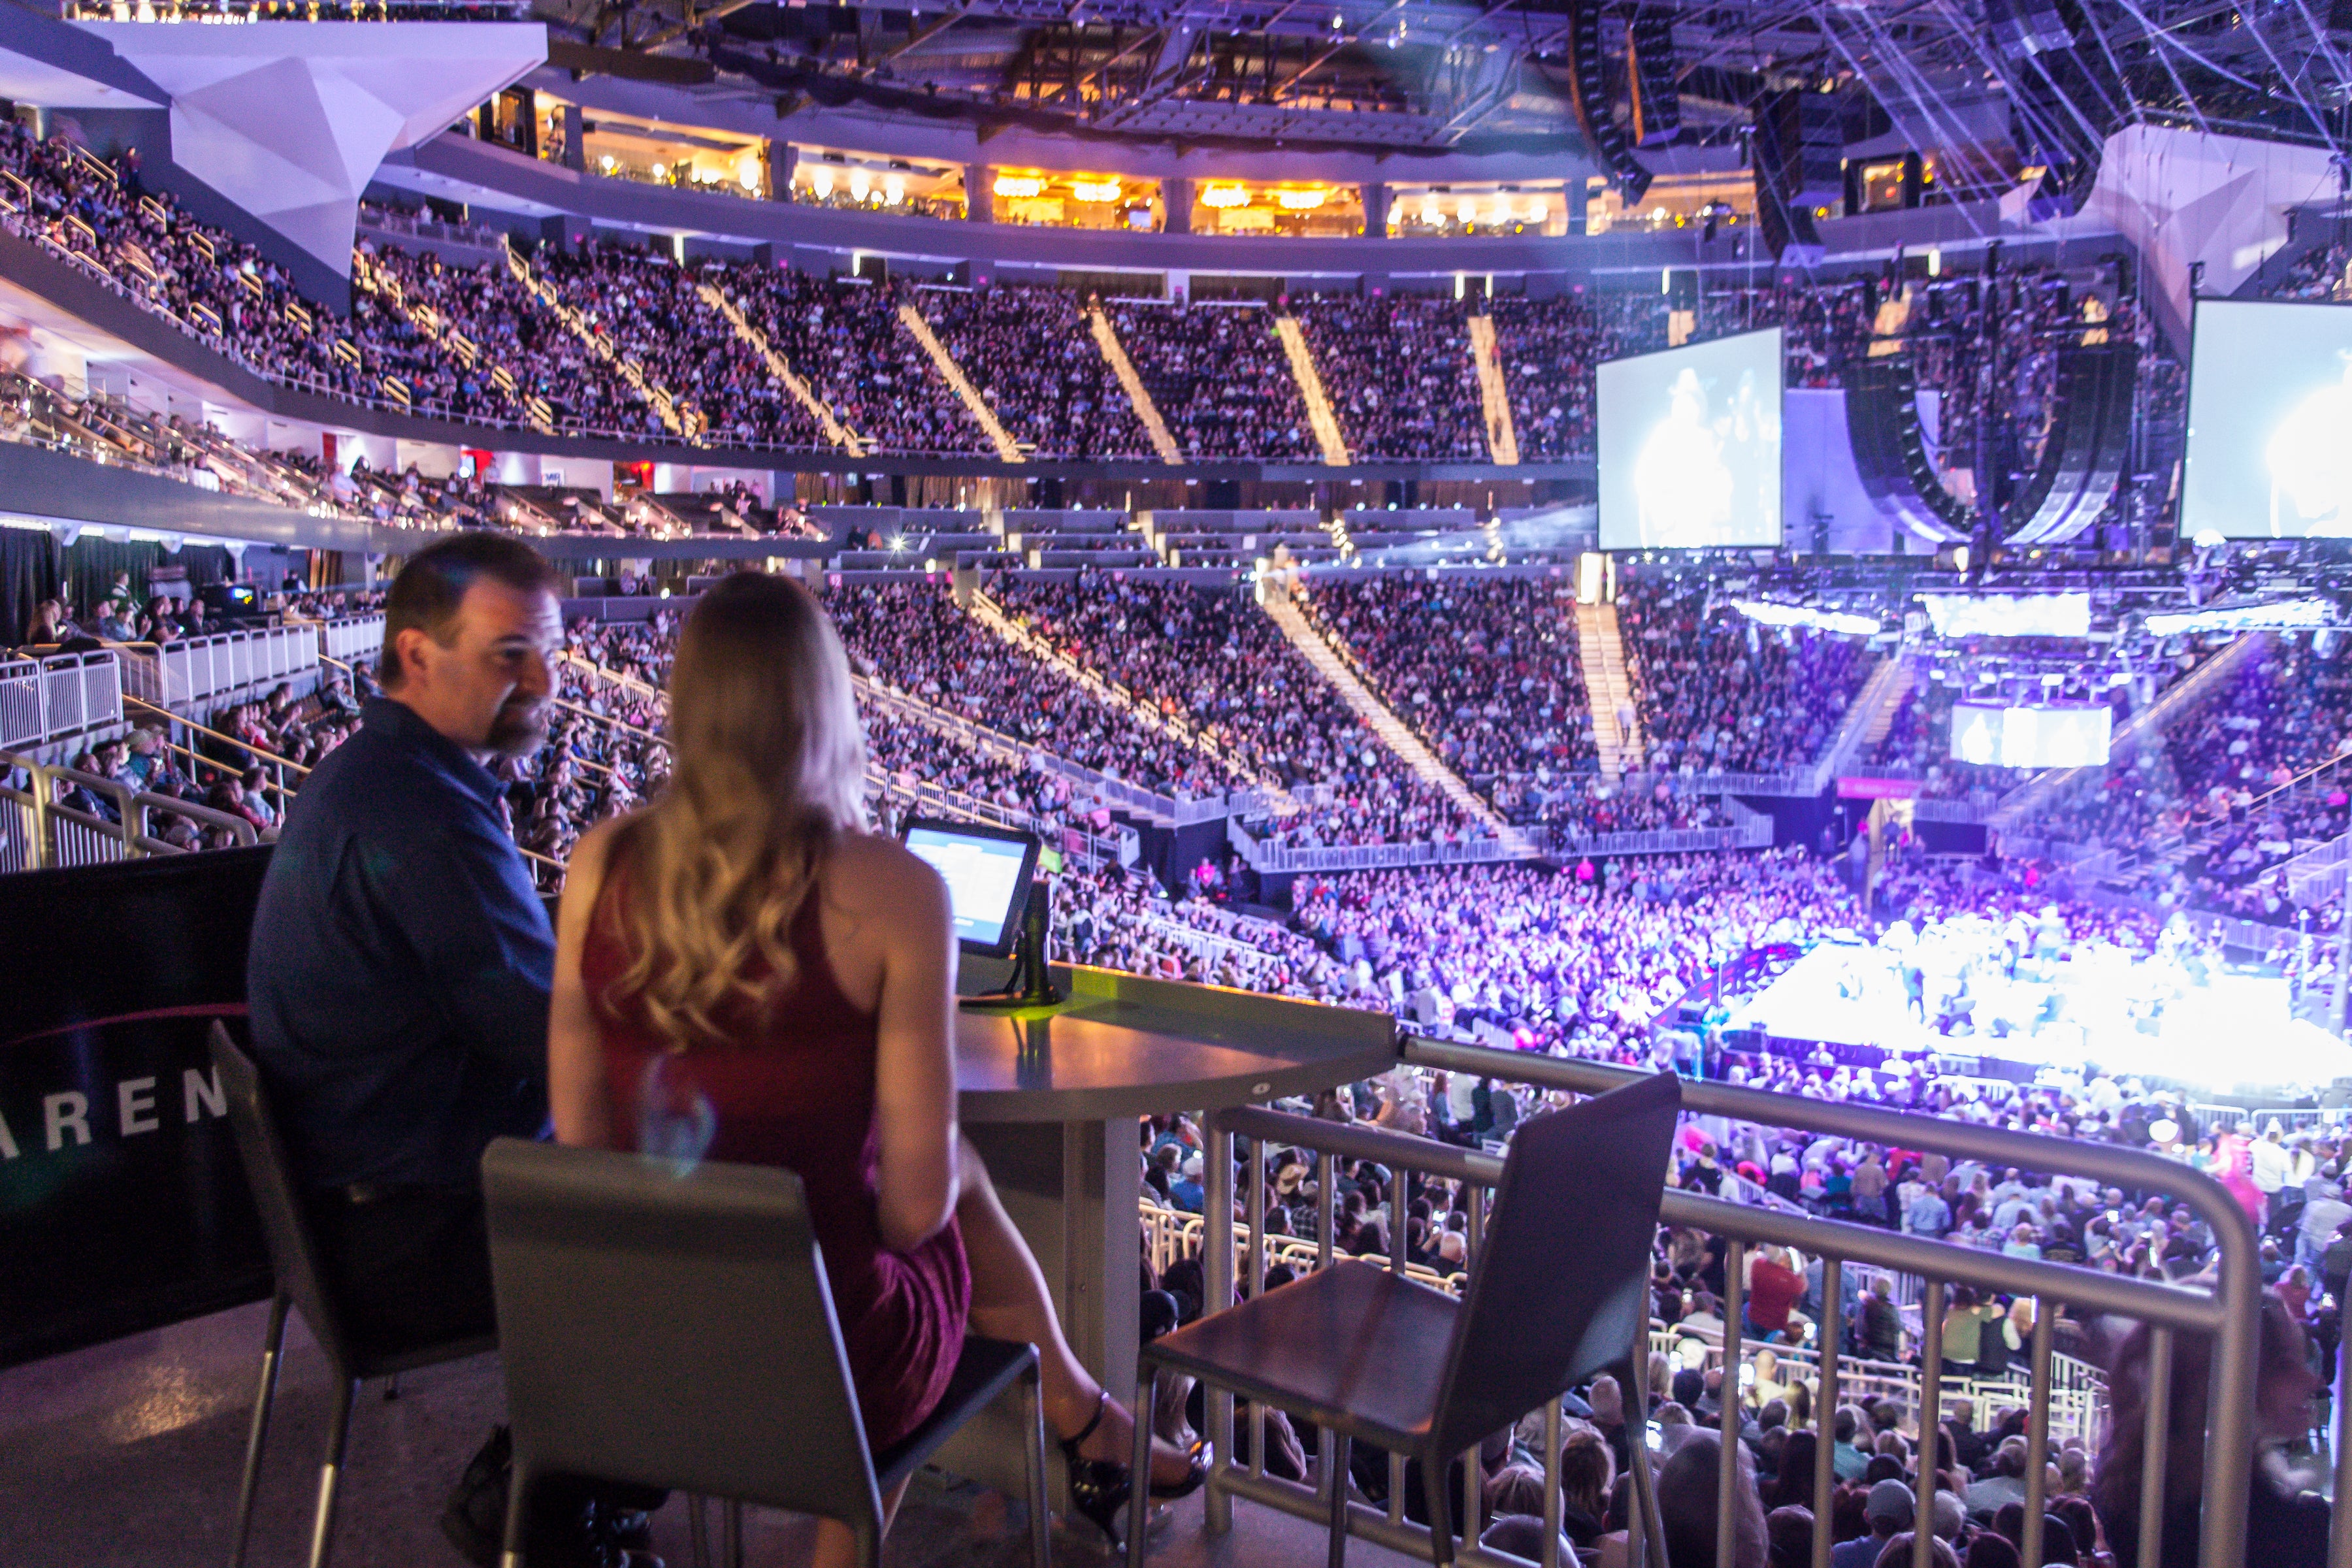 WHAT ARE THE BEST SEATS AT T MOBILE ARENA